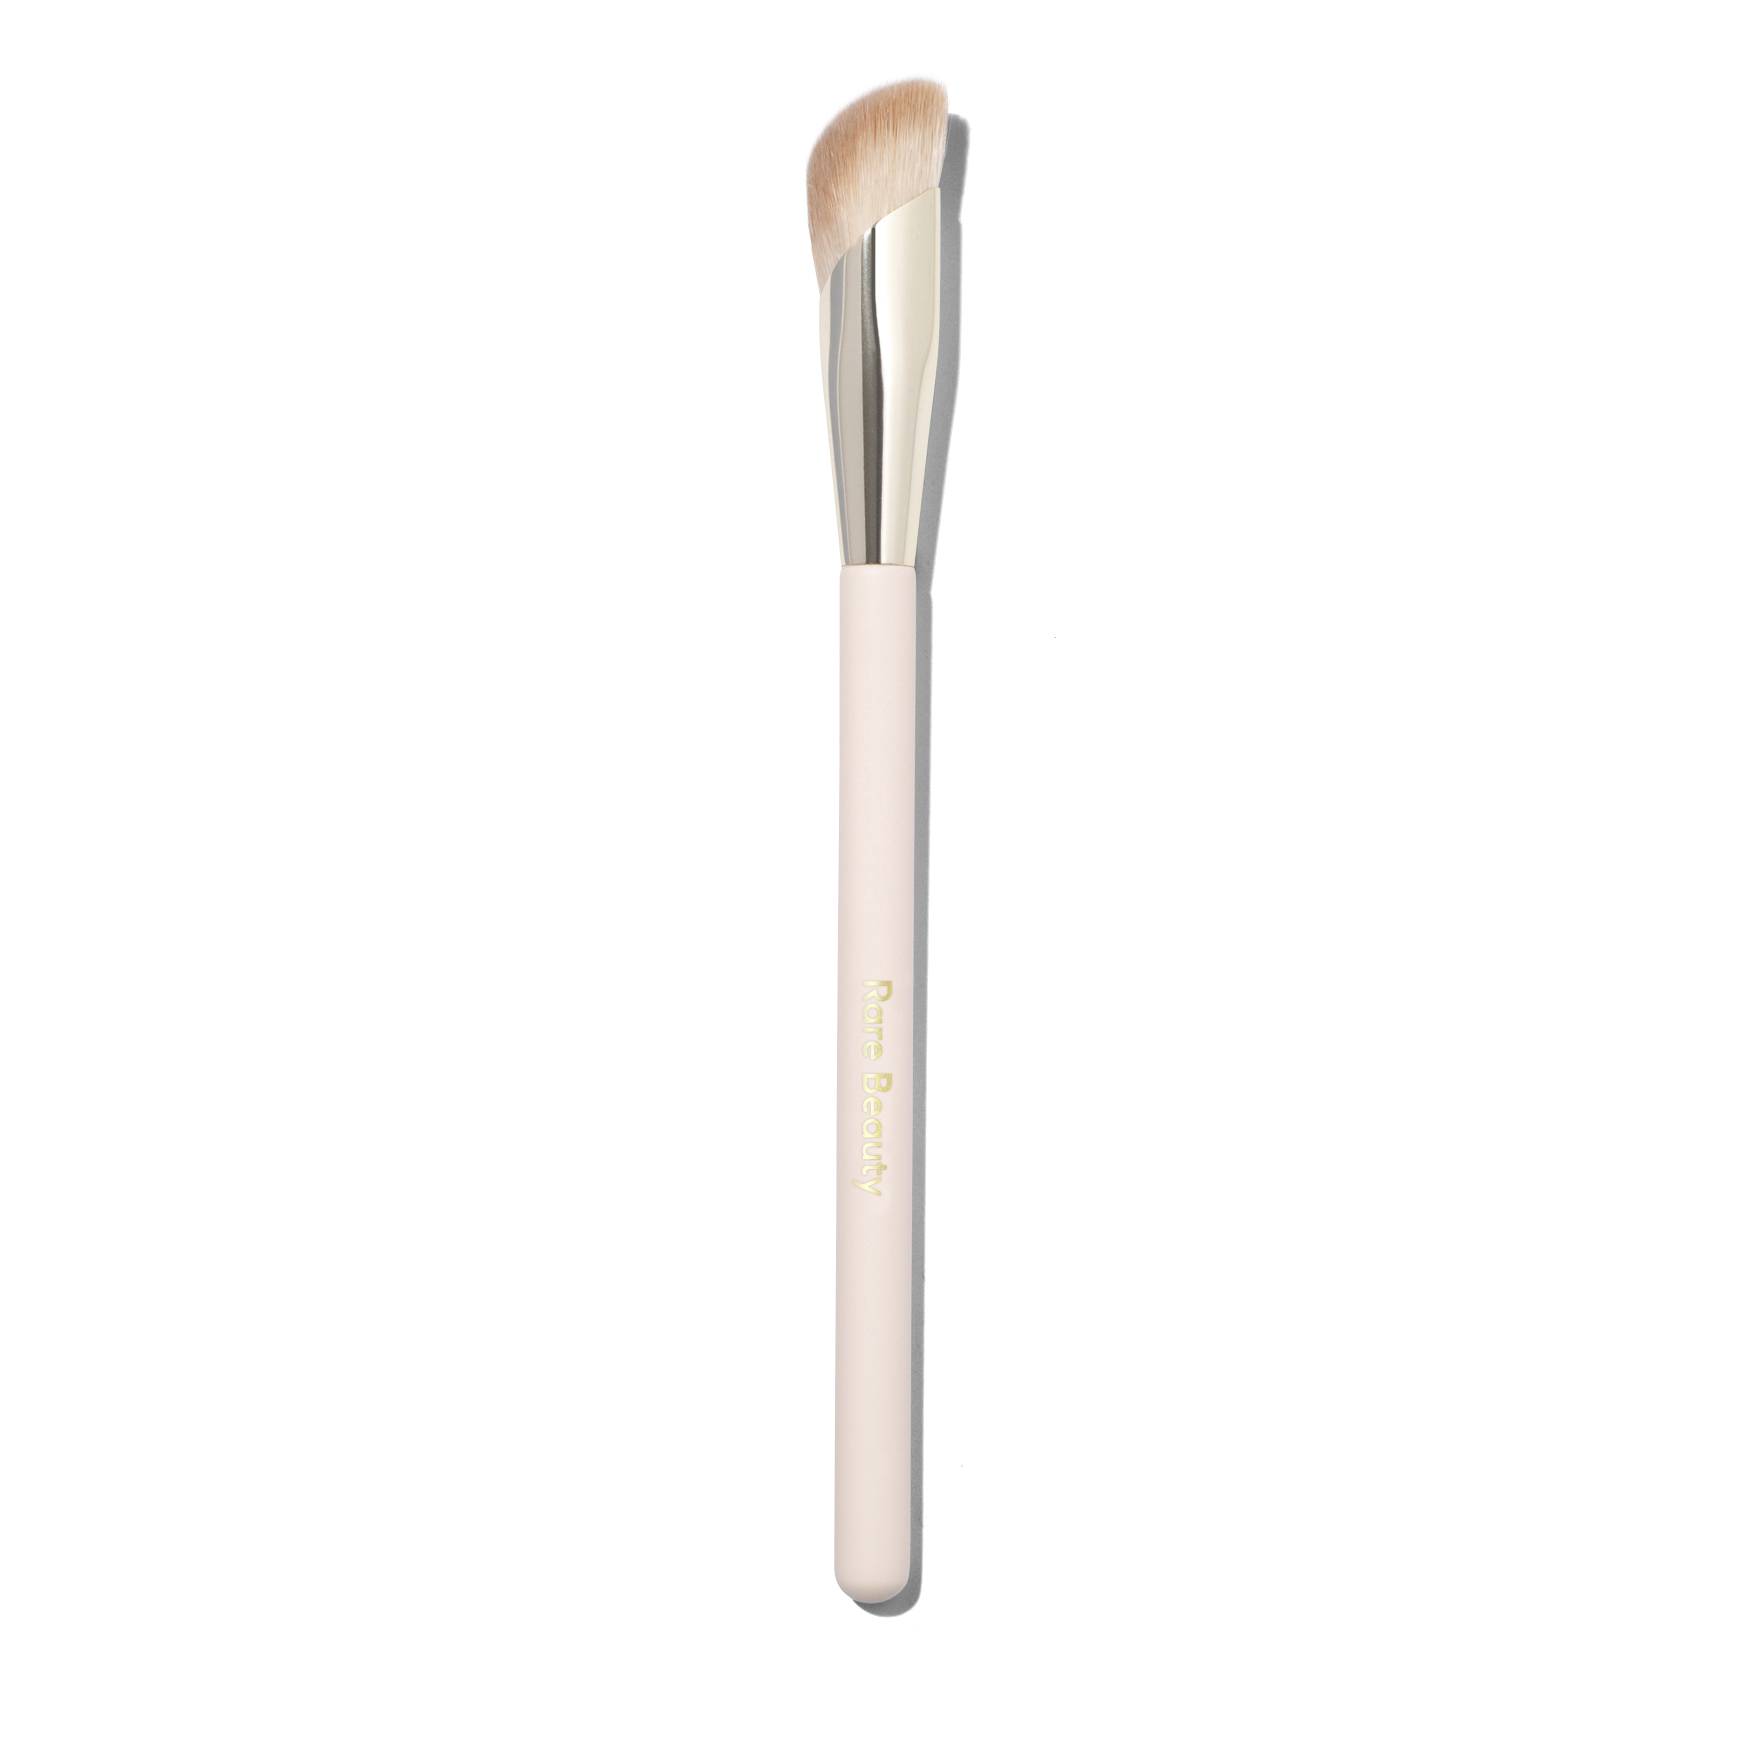 Rare Beauty Liquid Touch Concealer Brush | Space NK